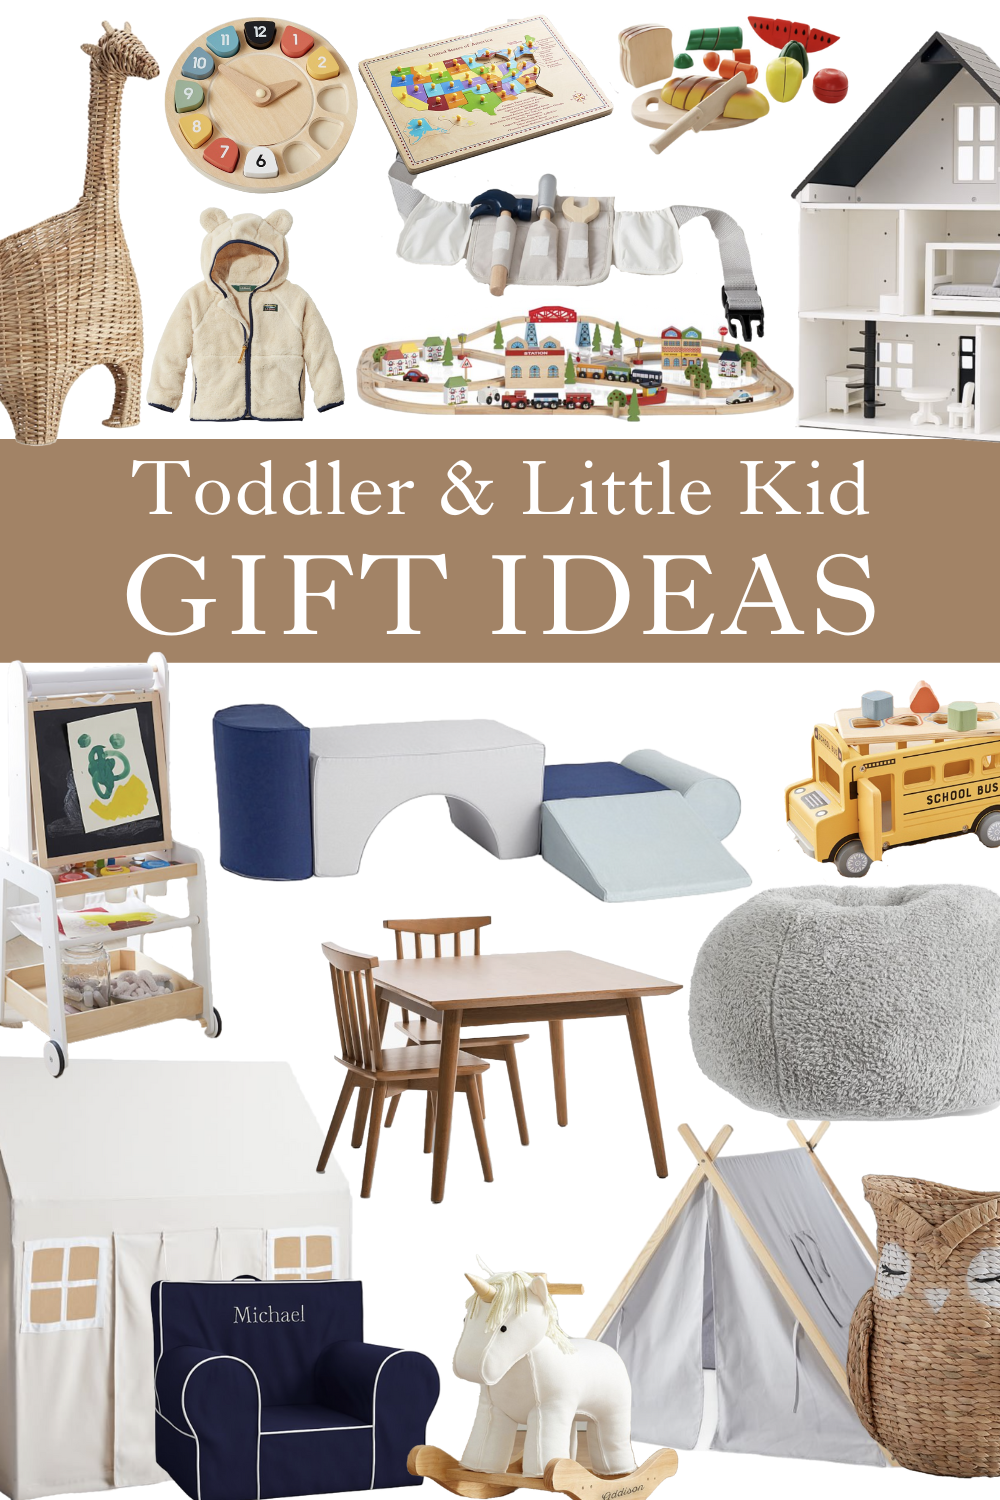 Gifts for toddlers & little kids